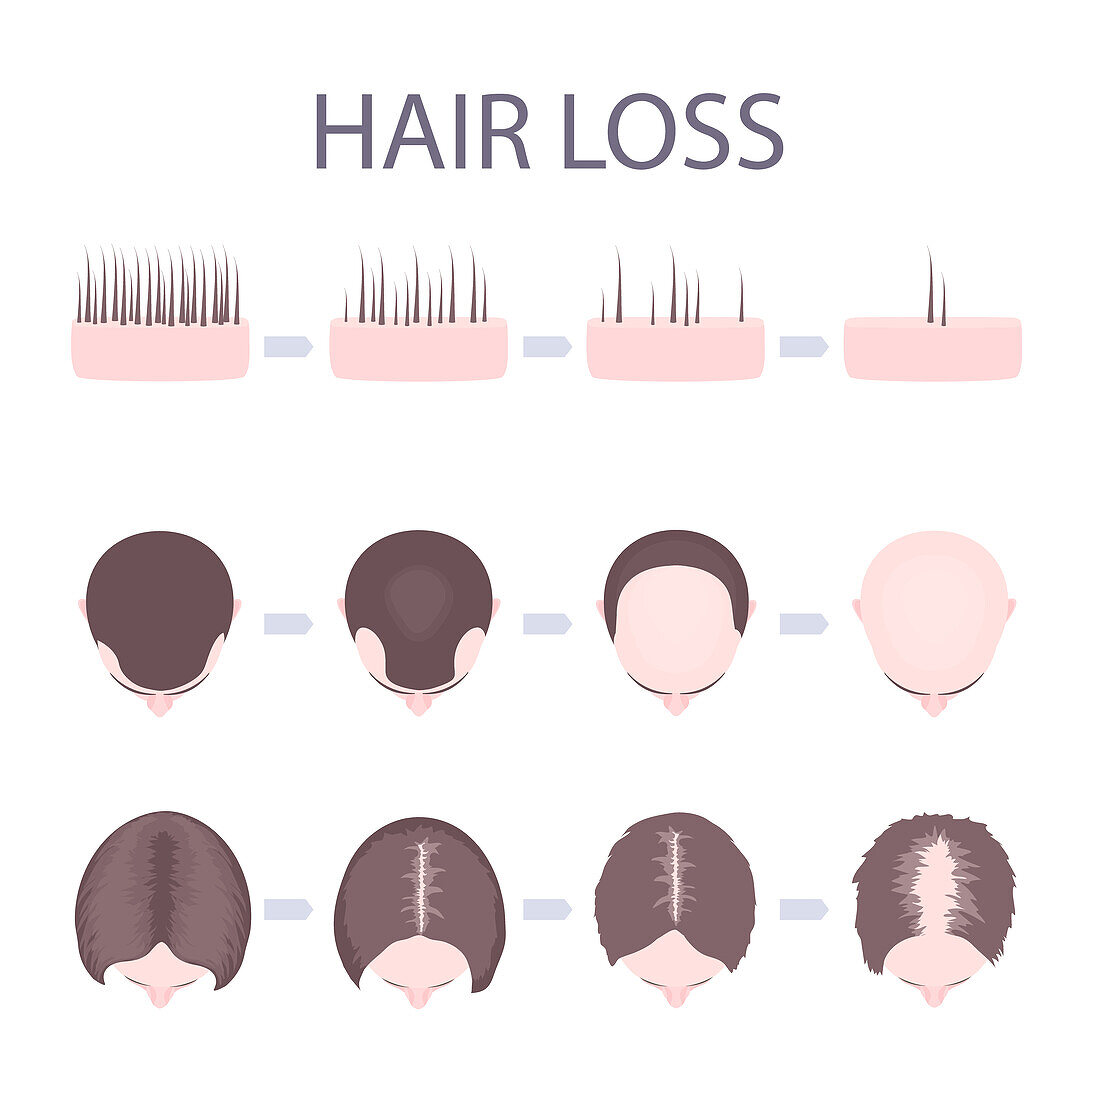 Male and female hair loss patterns, conceptual illustration